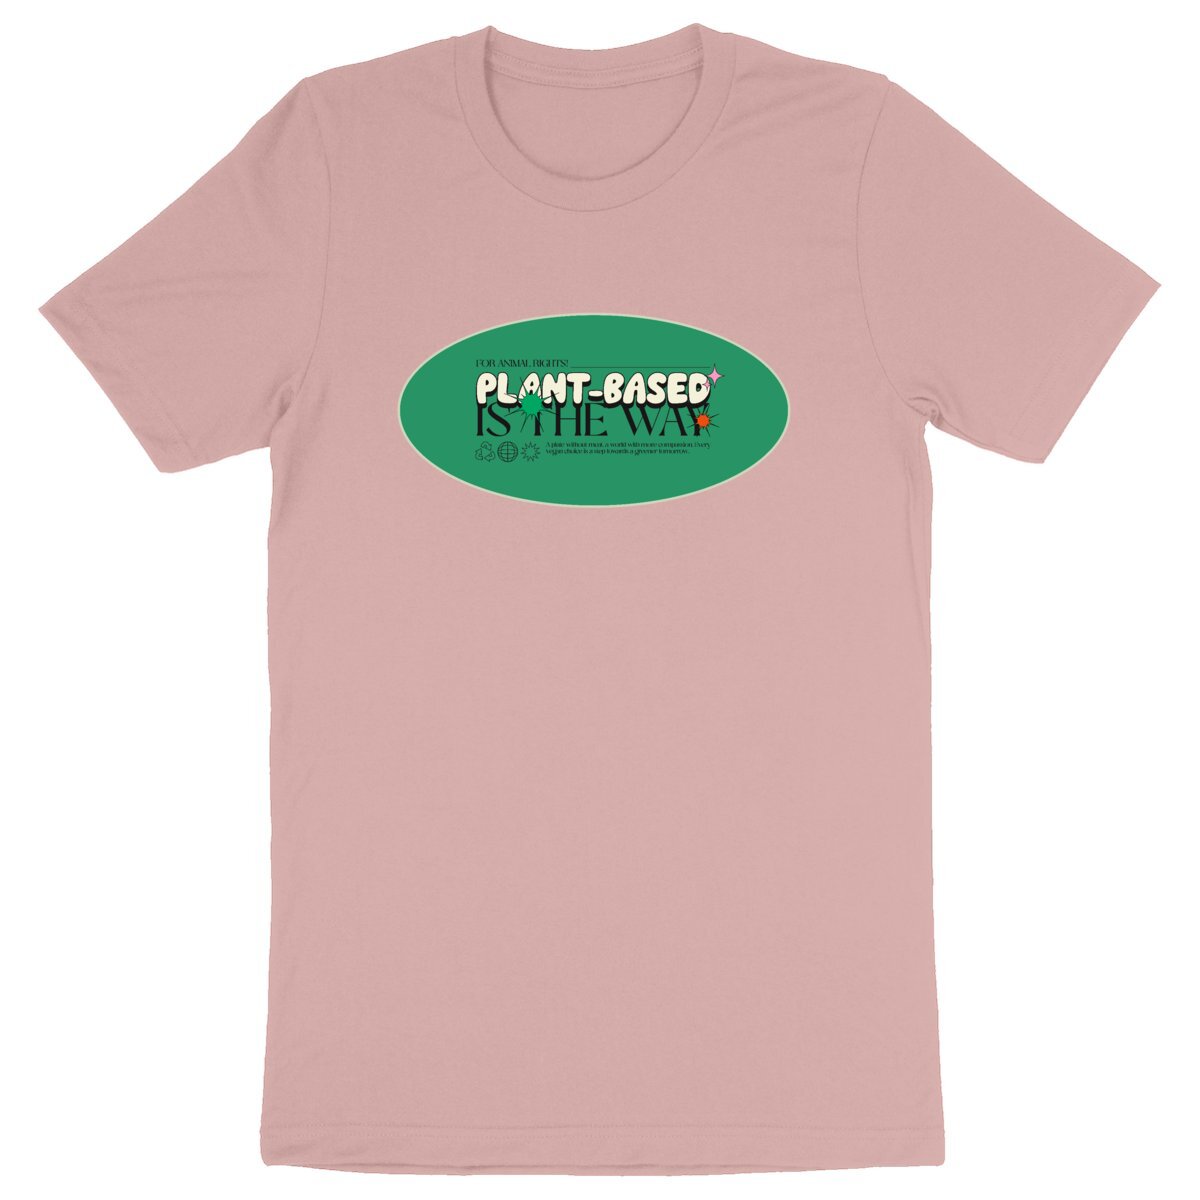 Plant-based is the way - Organic T-shirt